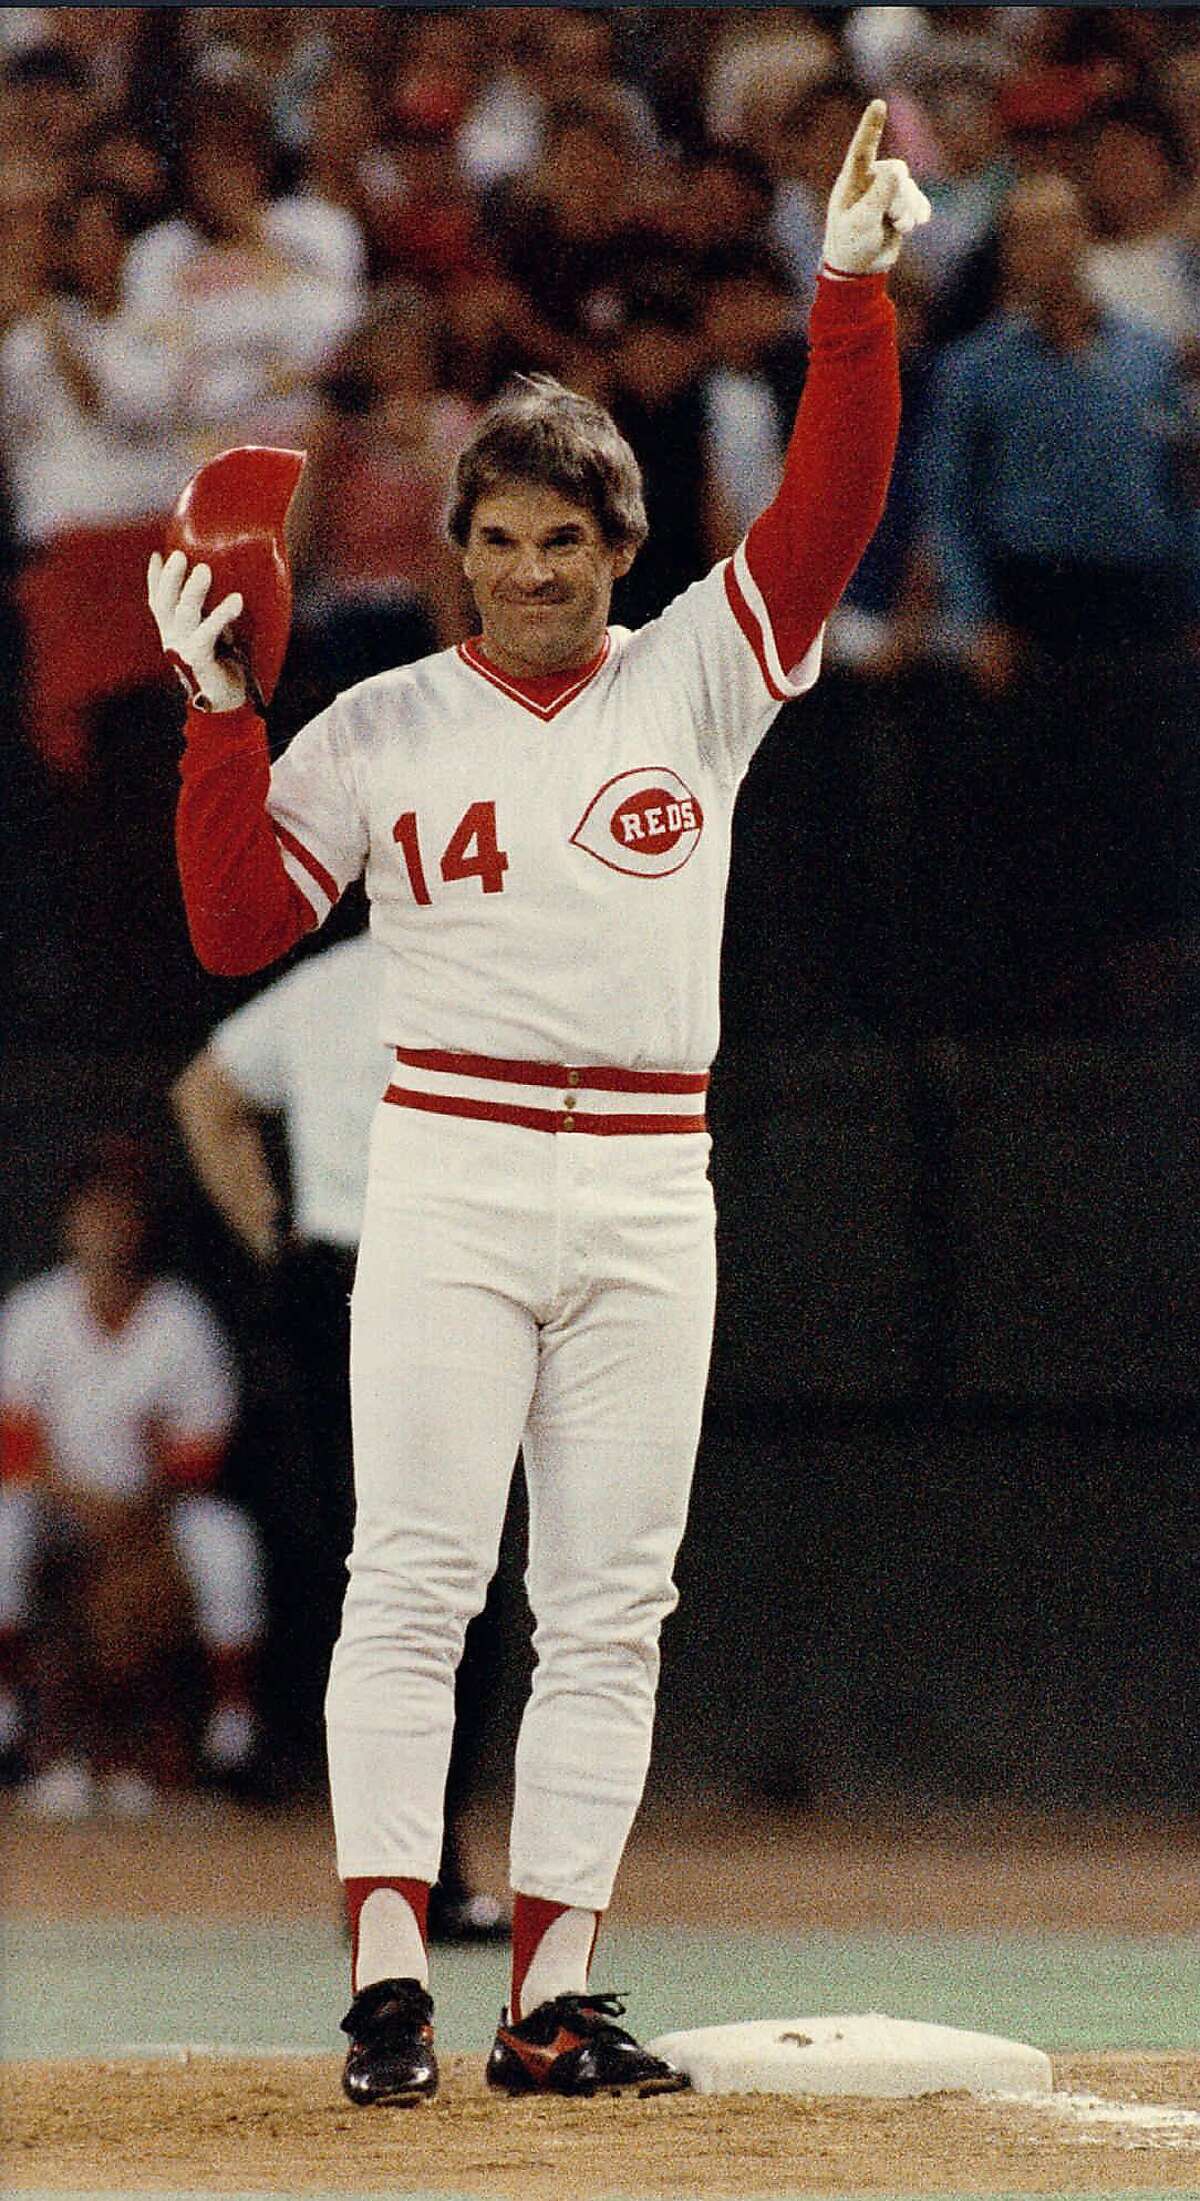 ** FILE ** Cincinnati Reds Pete Rose signals he's #1 after connecting for his 4,192nd career base hit to break Ty Cobb's all-time record in this Sept. 11, 1985 photo in Cincinnati. A 17-time All-Star and former National League MVP, Rose agreed to a lifetime ban from baseball in August 1989 following an investigation of his gambling but has maintained he never bet on baseball. Rose and commissioner Bud Selig met secretly in Milwaukee on Nov. 25, 2002, and their lawyers have been exchanging draft proposals that could end the ban, a baseball executive said Tuesday, Dec. 10, 2002, on the condition he not be identified. (AP Photo/Bill Waugh)